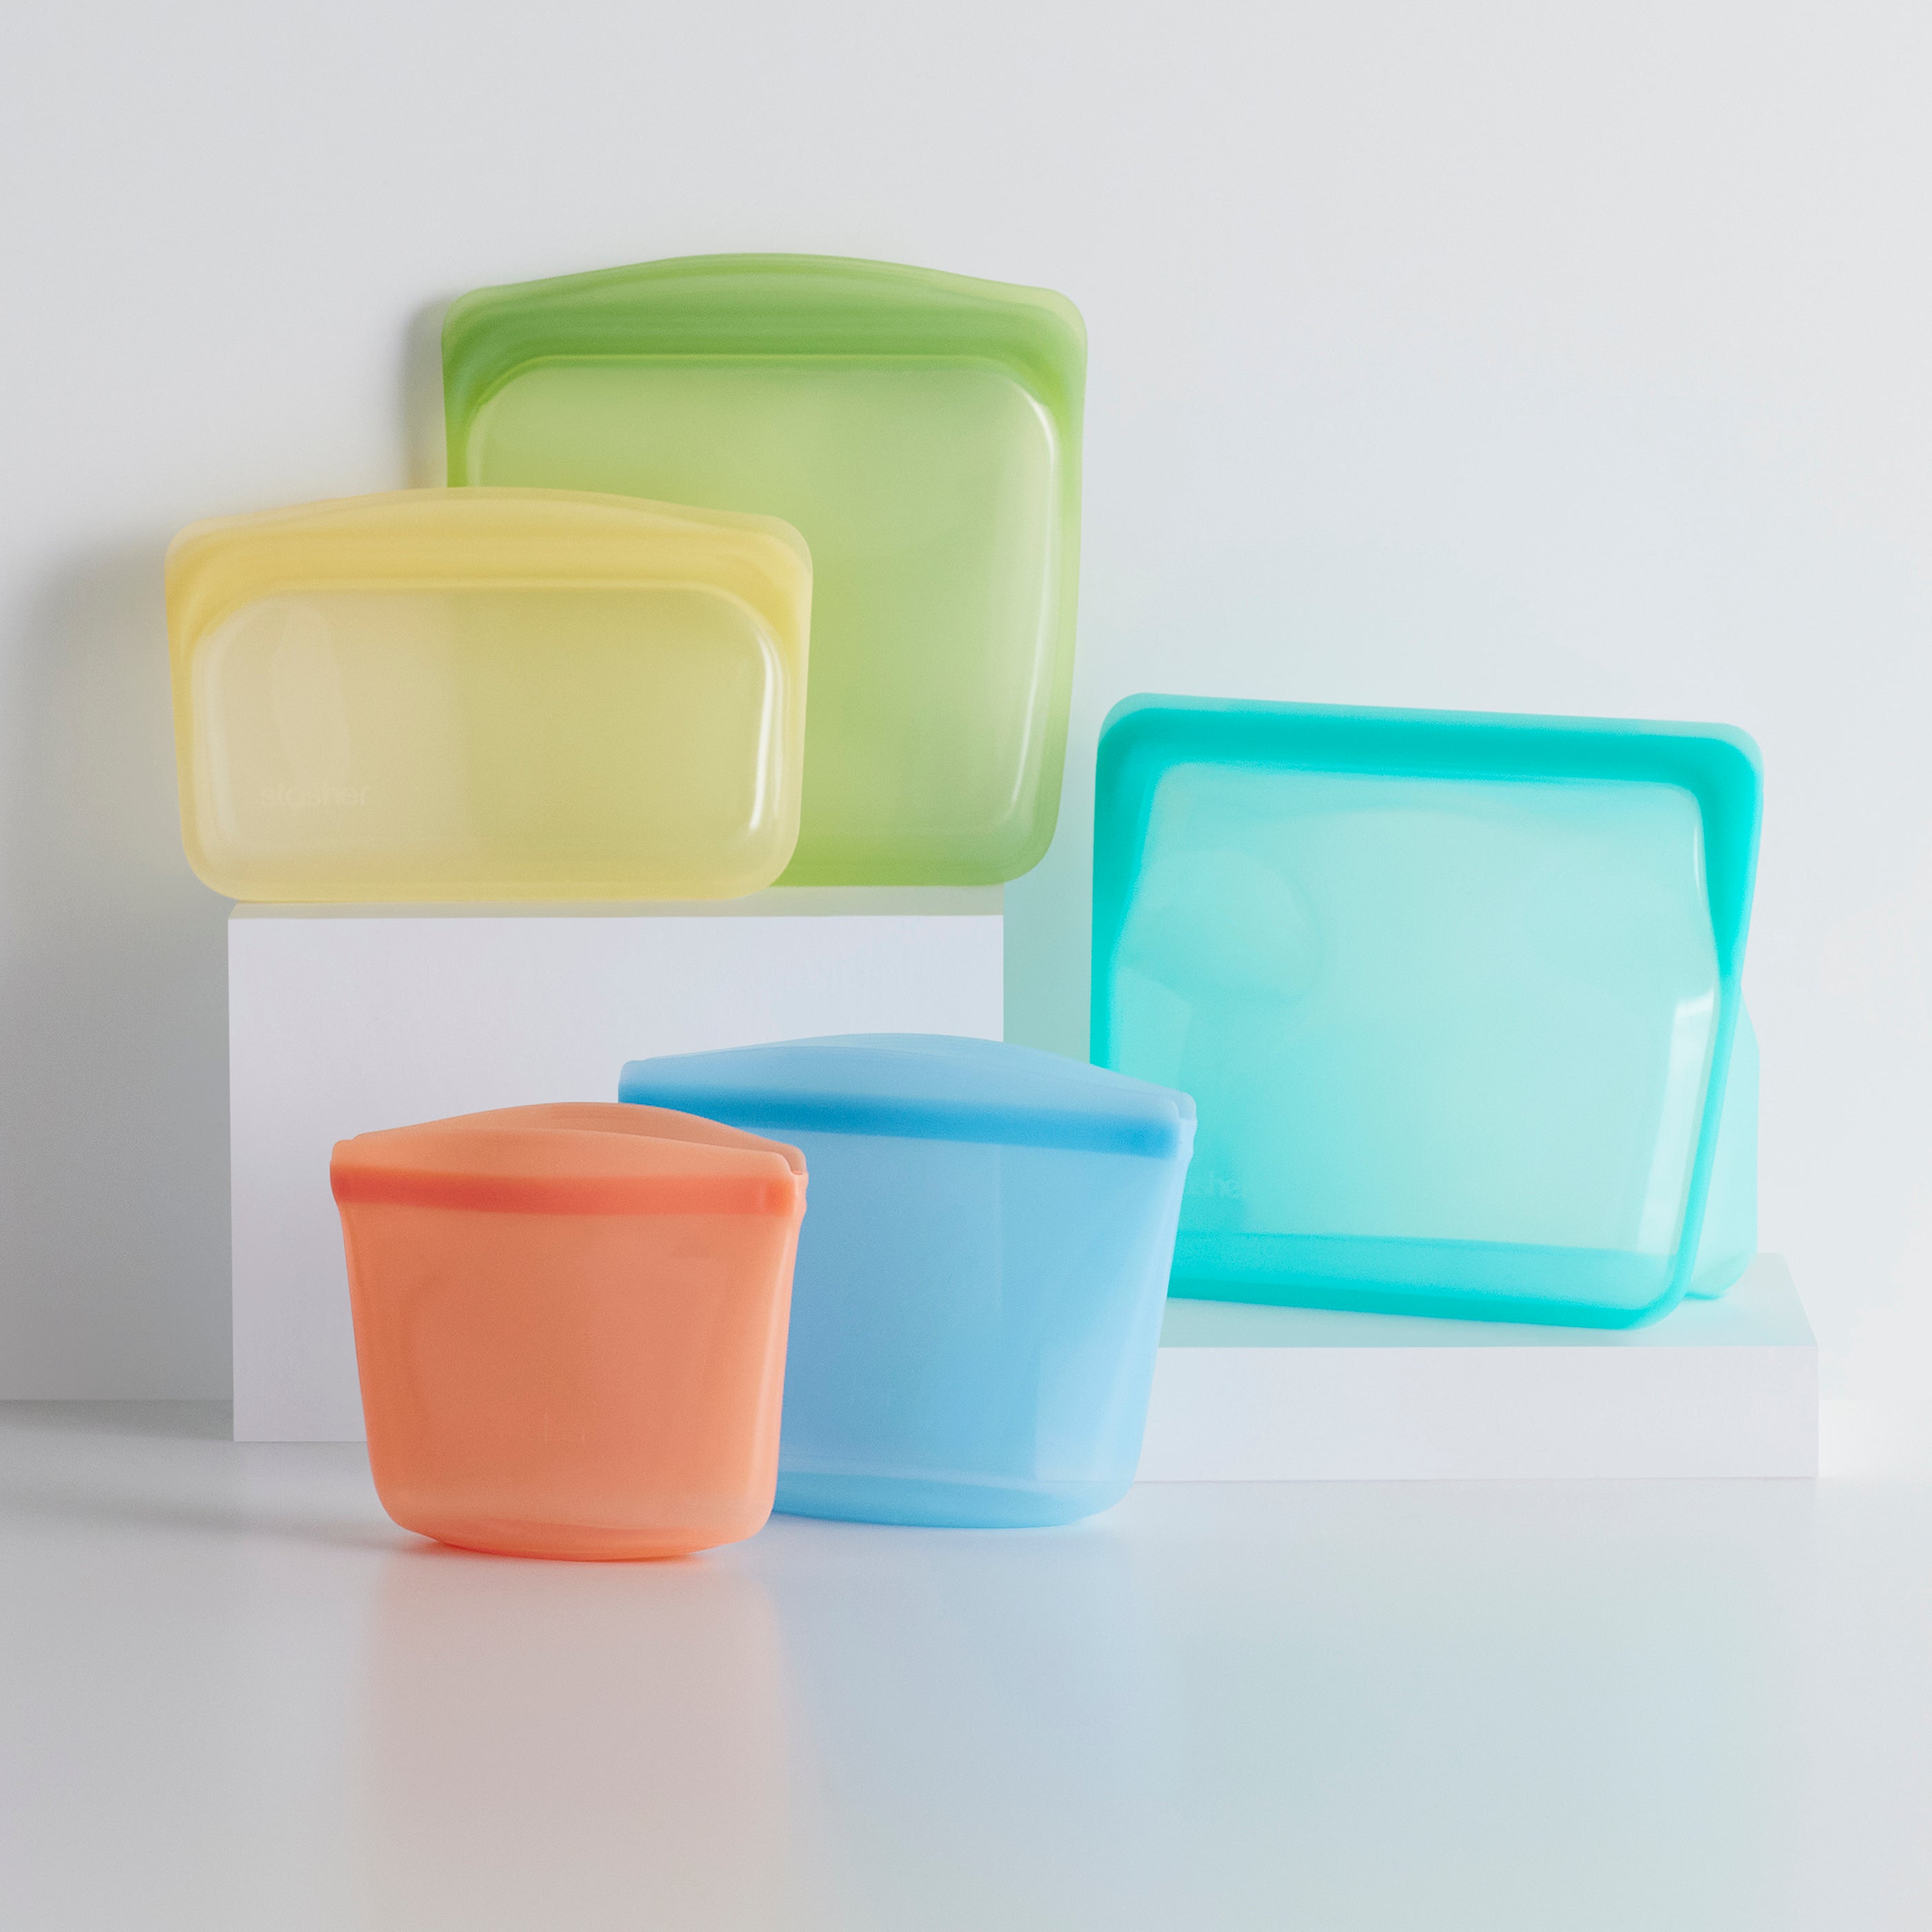 Zip Top Starter Bag Set in Frost - Reusable Silicone Bags & Containers